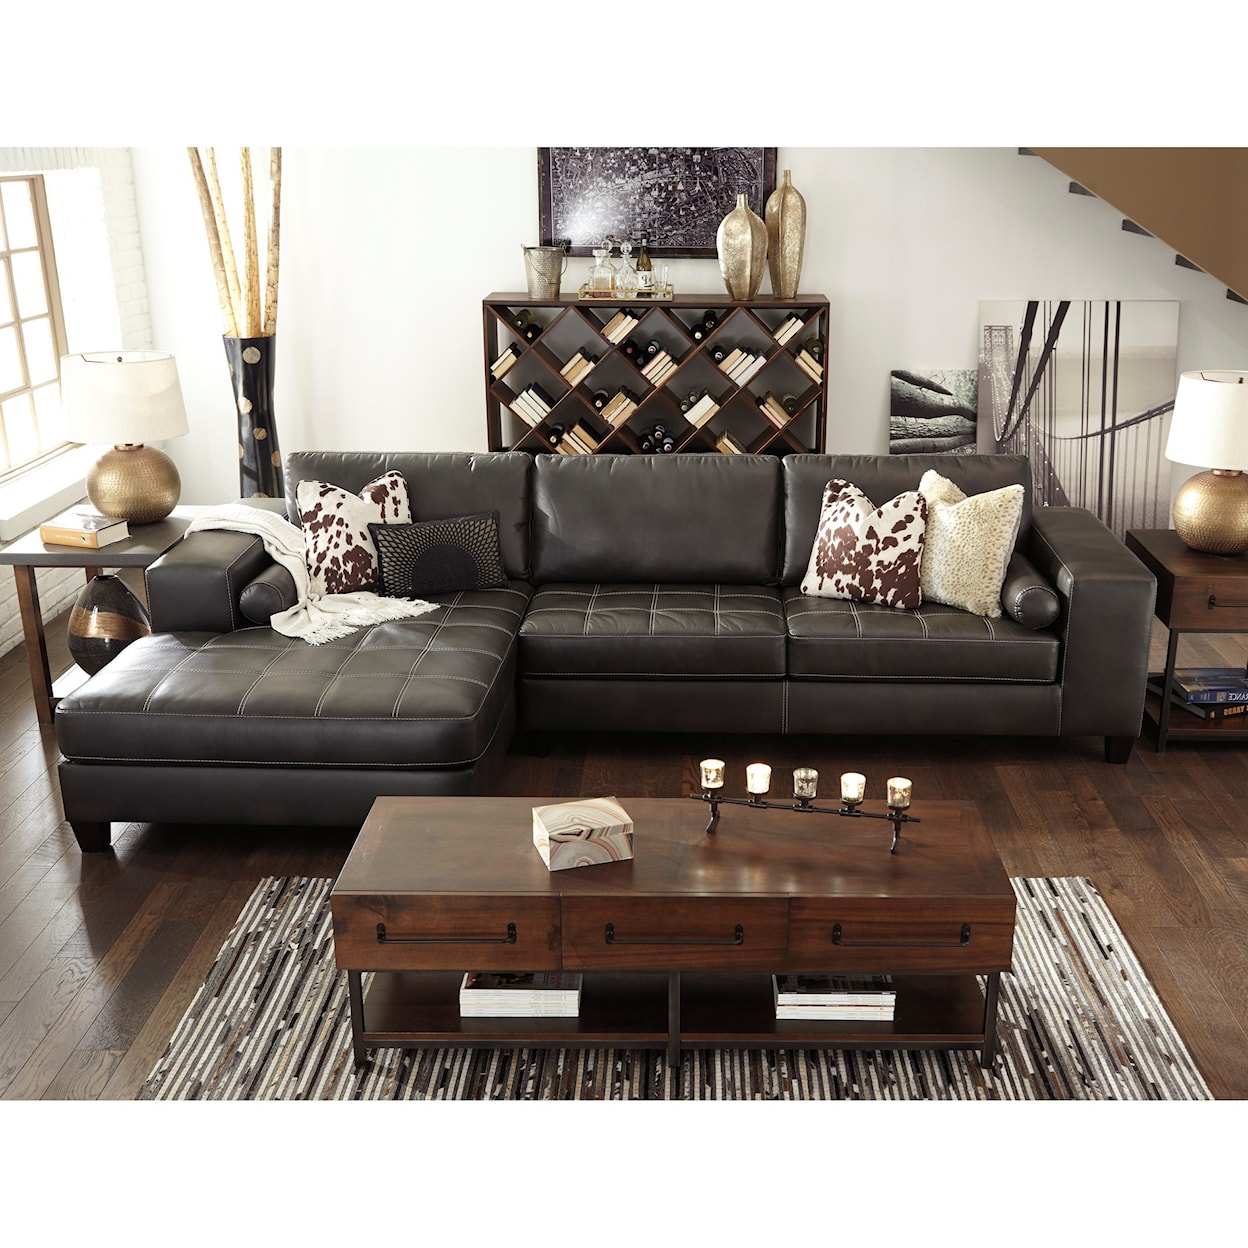 Signature NICO 2-Piece Sectional with Chaise